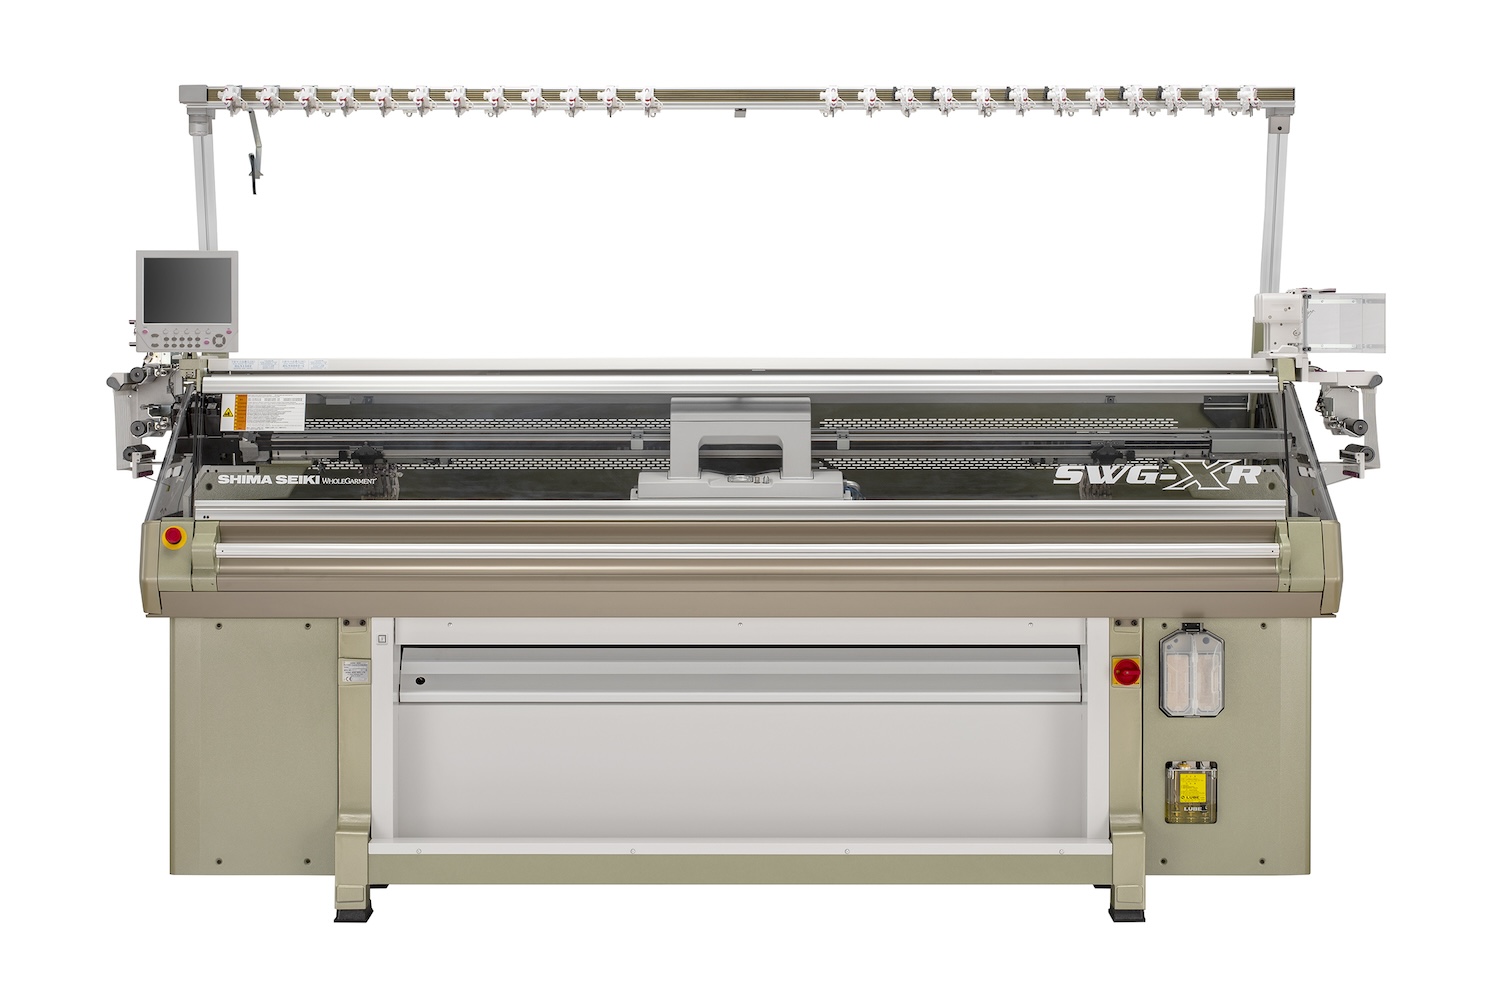 SWG-XR features 4 needle beds for all-needle knitting of high quality WHOLEGARMENT products using the company's original SlideNeedle. © Shima Seiki